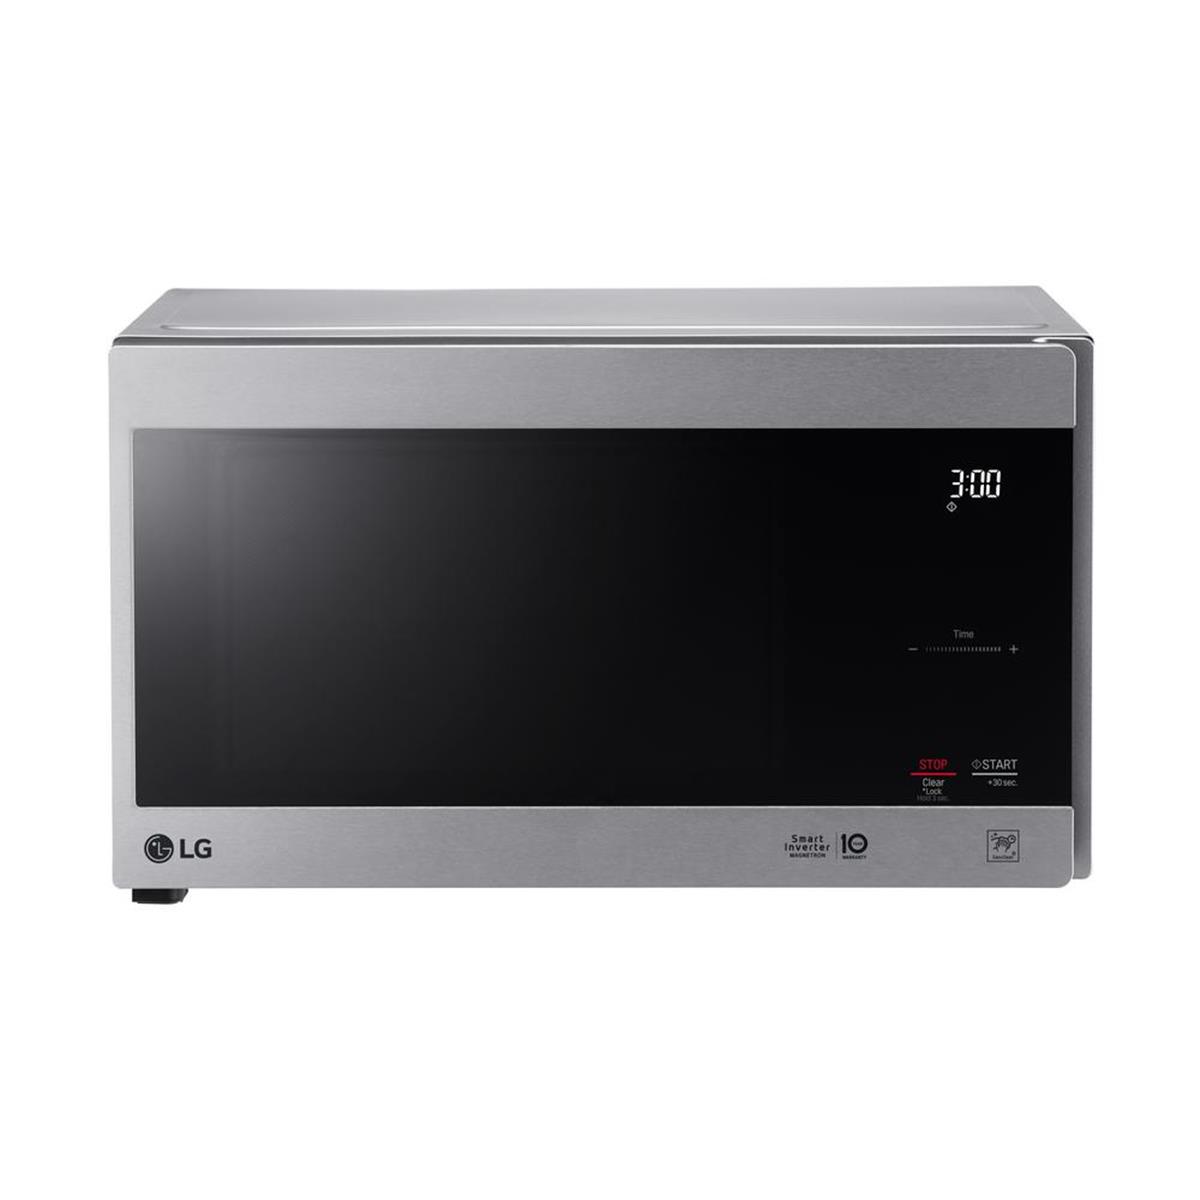 Lmc0975st 0.9 Cf Neochef Counter Top Microwave Oven With Stainless Steel